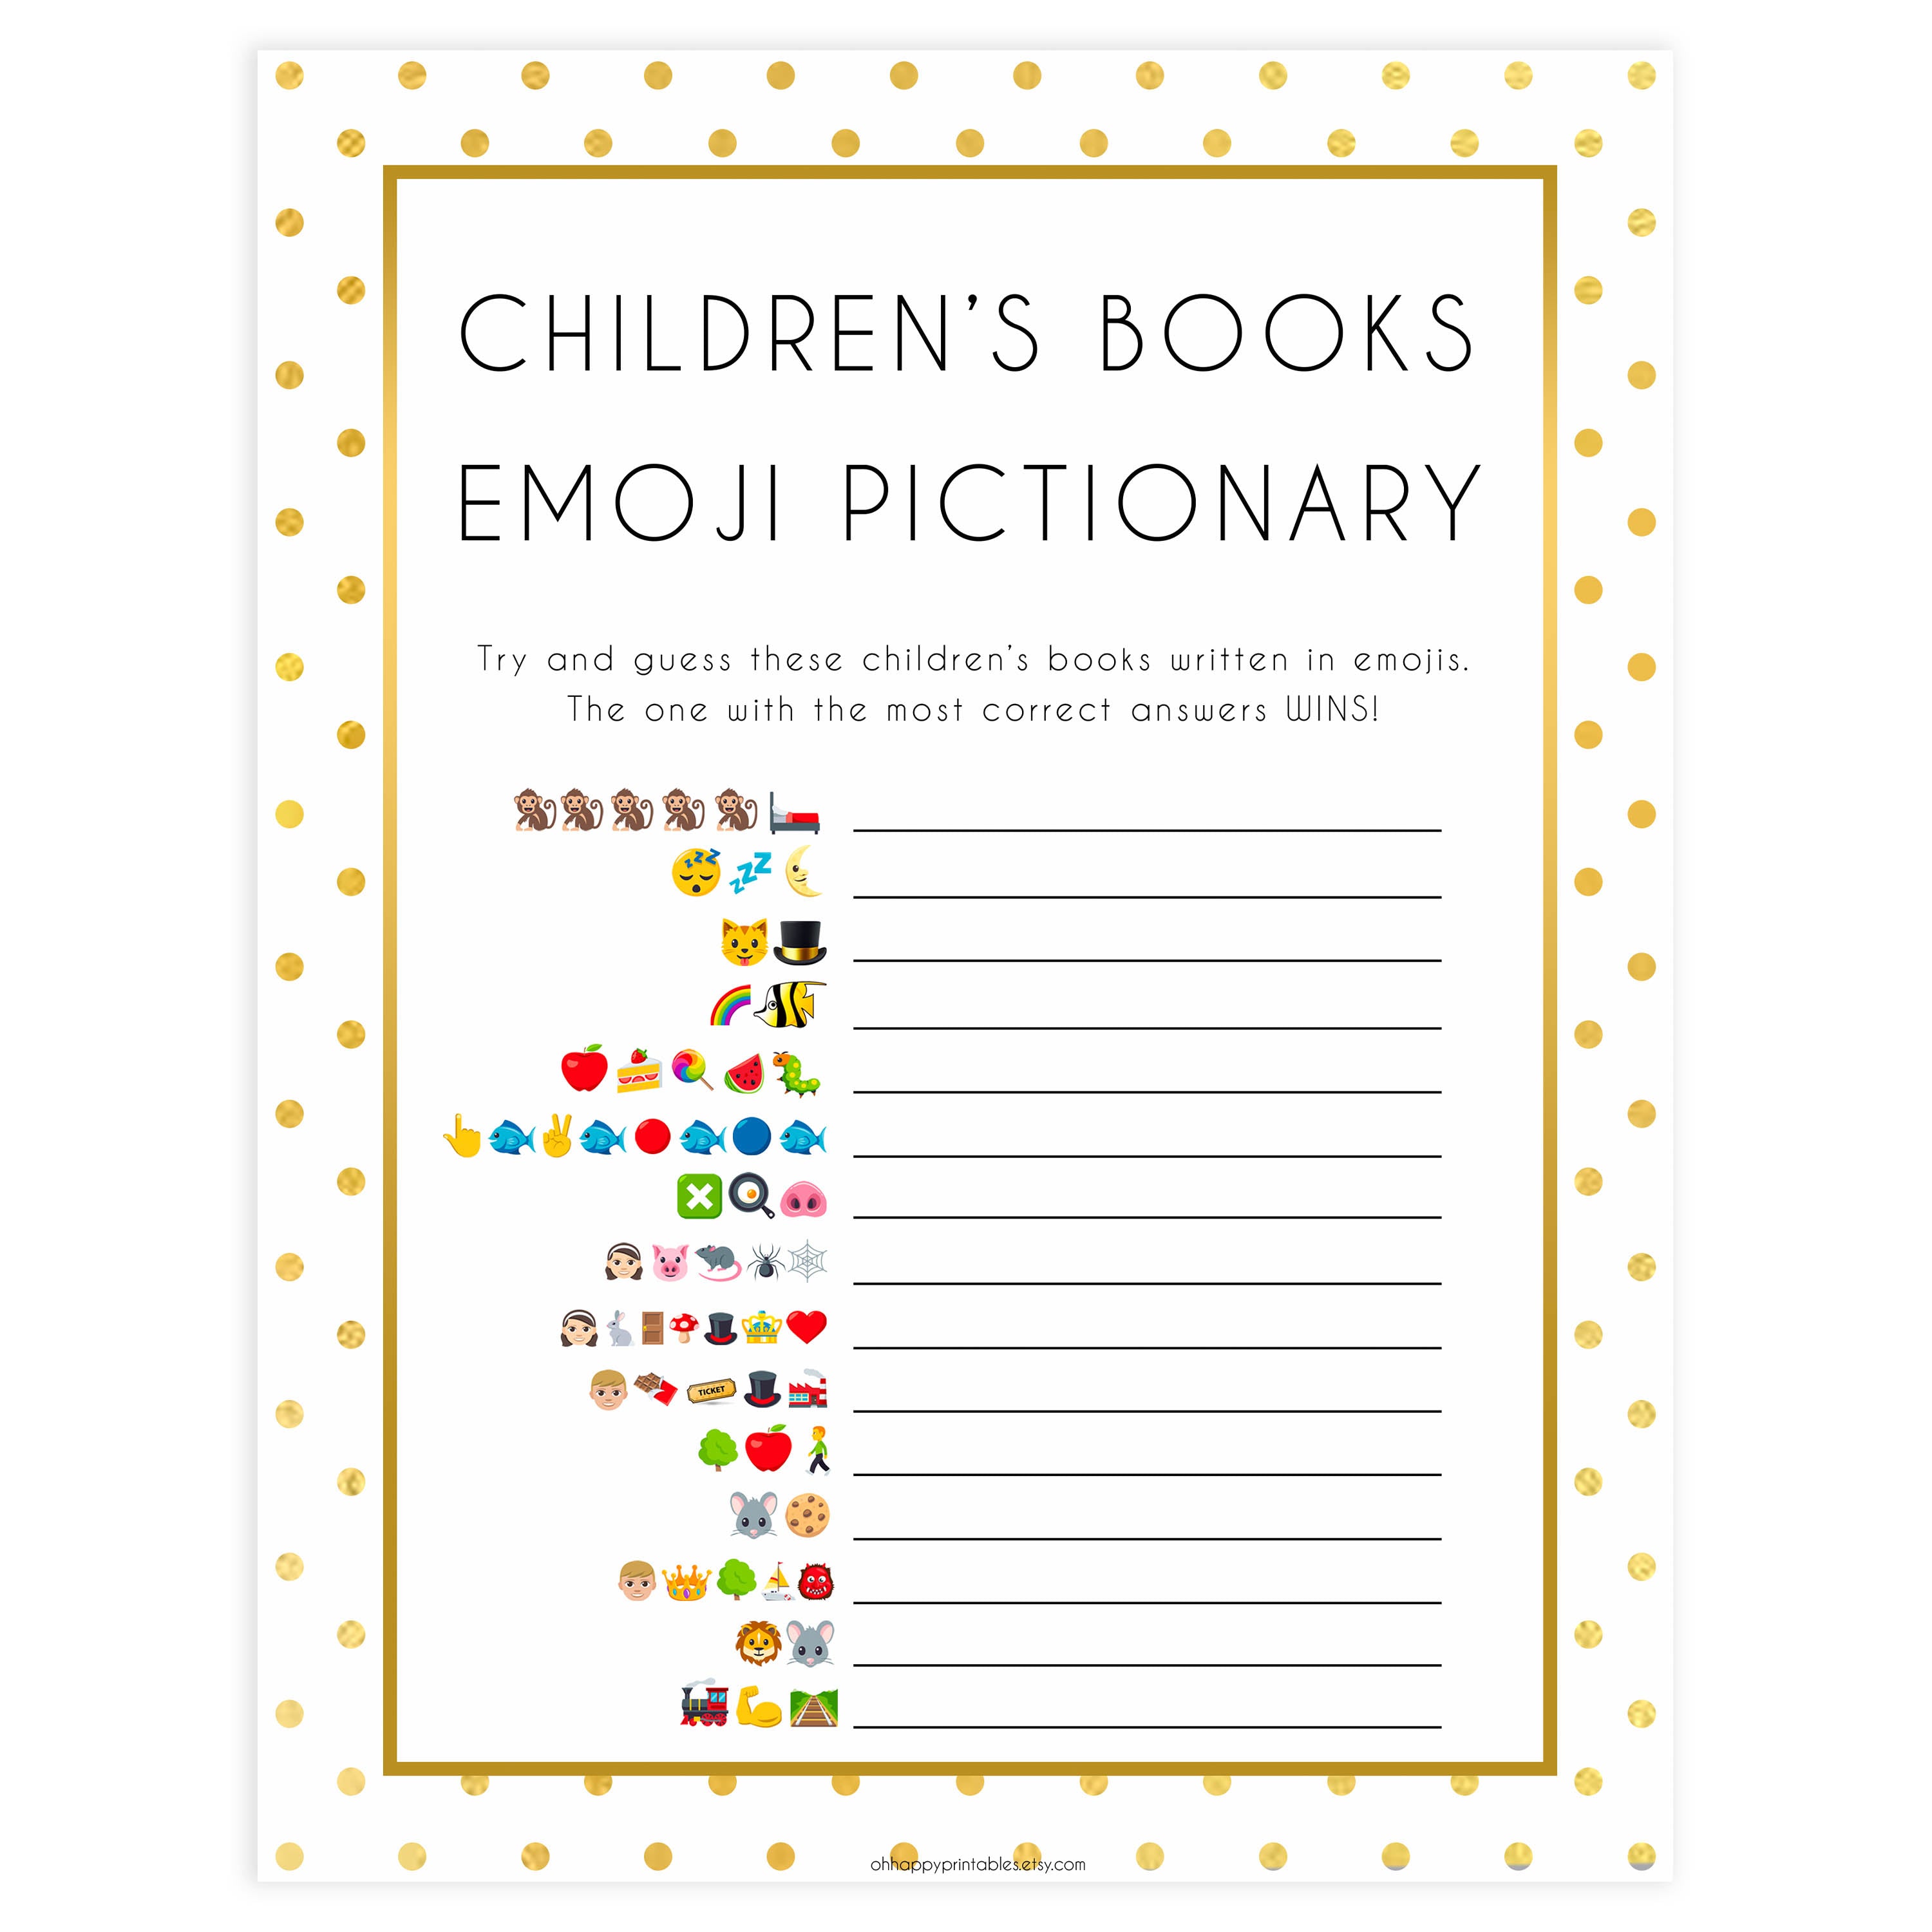 childrens books emoji pictionary, Printable baby shower games, baby gold dots fun baby games, baby shower games, fun baby shower ideas, top baby shower ideas, gold glitter shower baby shower, friends baby shower ideas